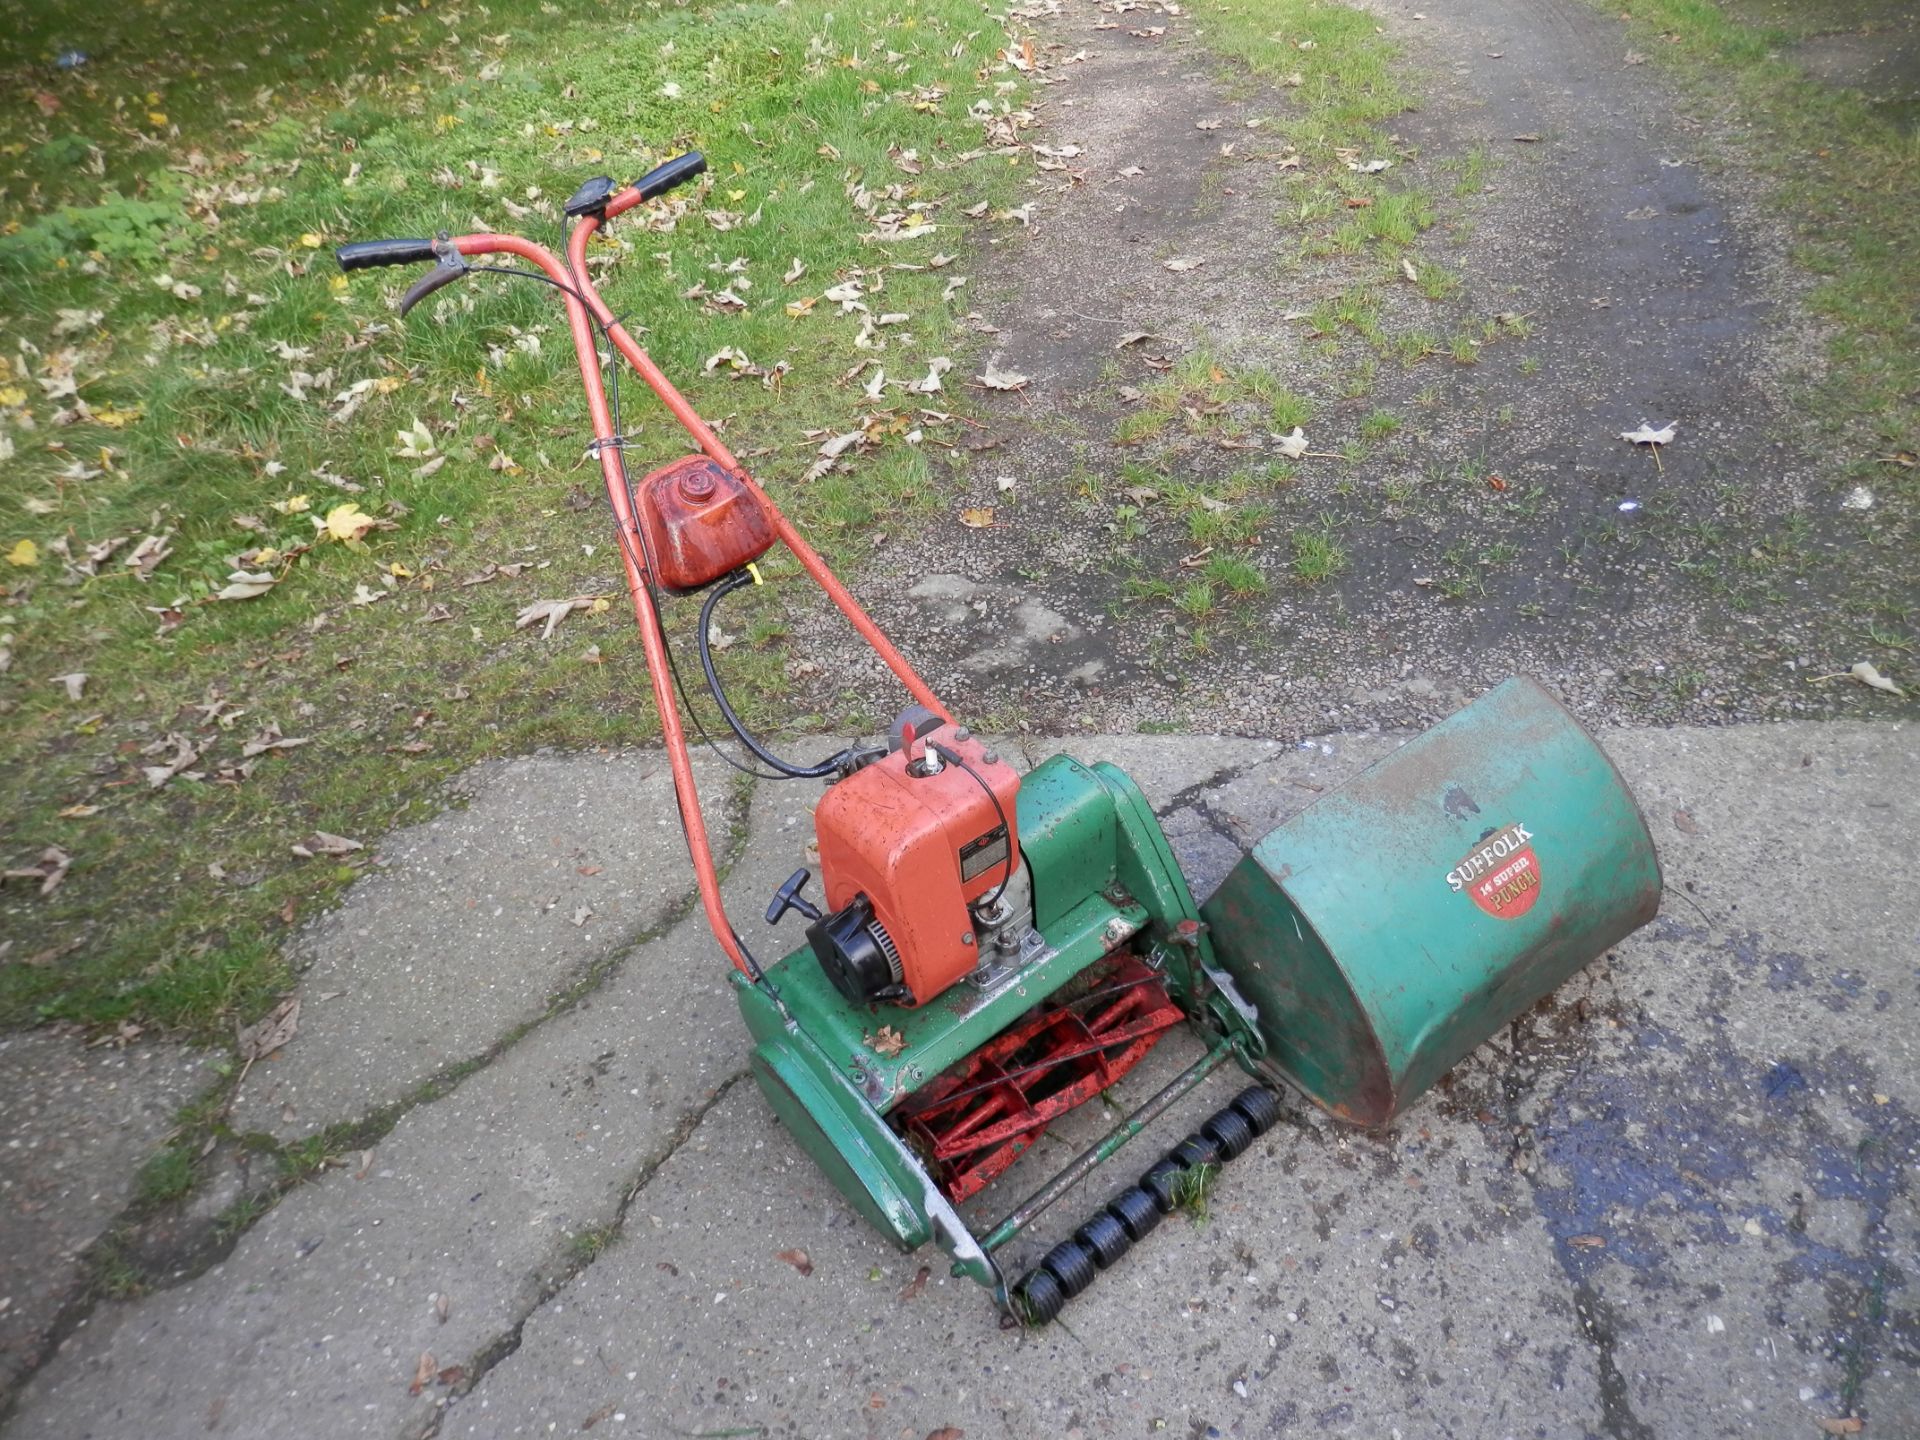 1960S WORKING VINTAGE SUFFOLK "PUNCH" PETROL 14" SELF PROPELLED LAWN MOVER. - Image 2 of 11